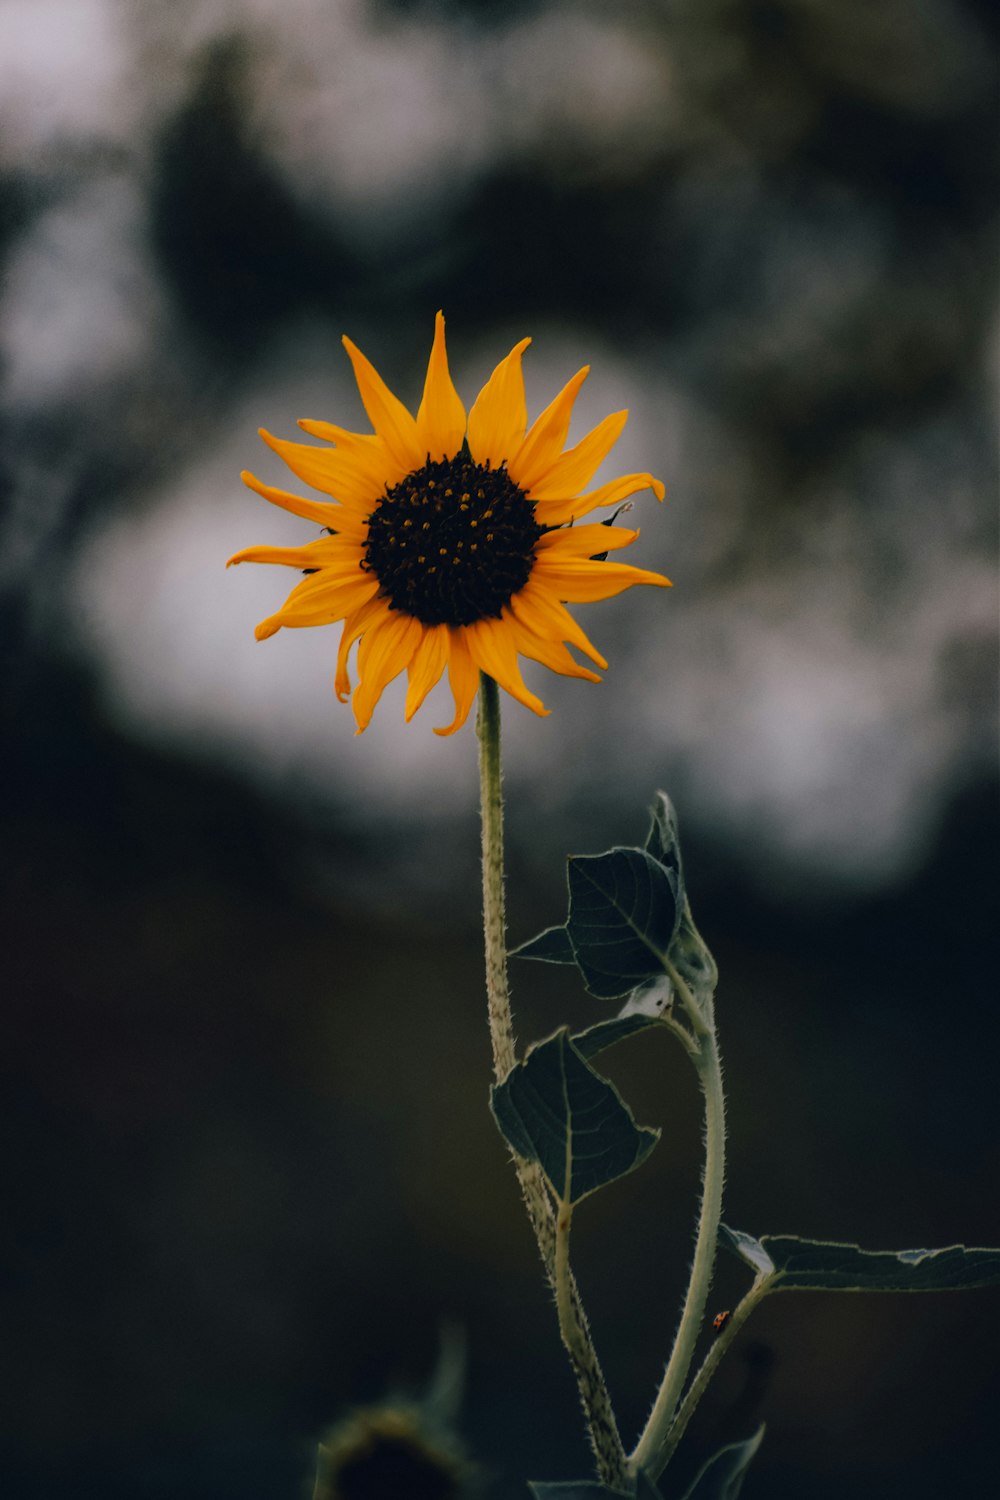 a single sunflower with a blurry background